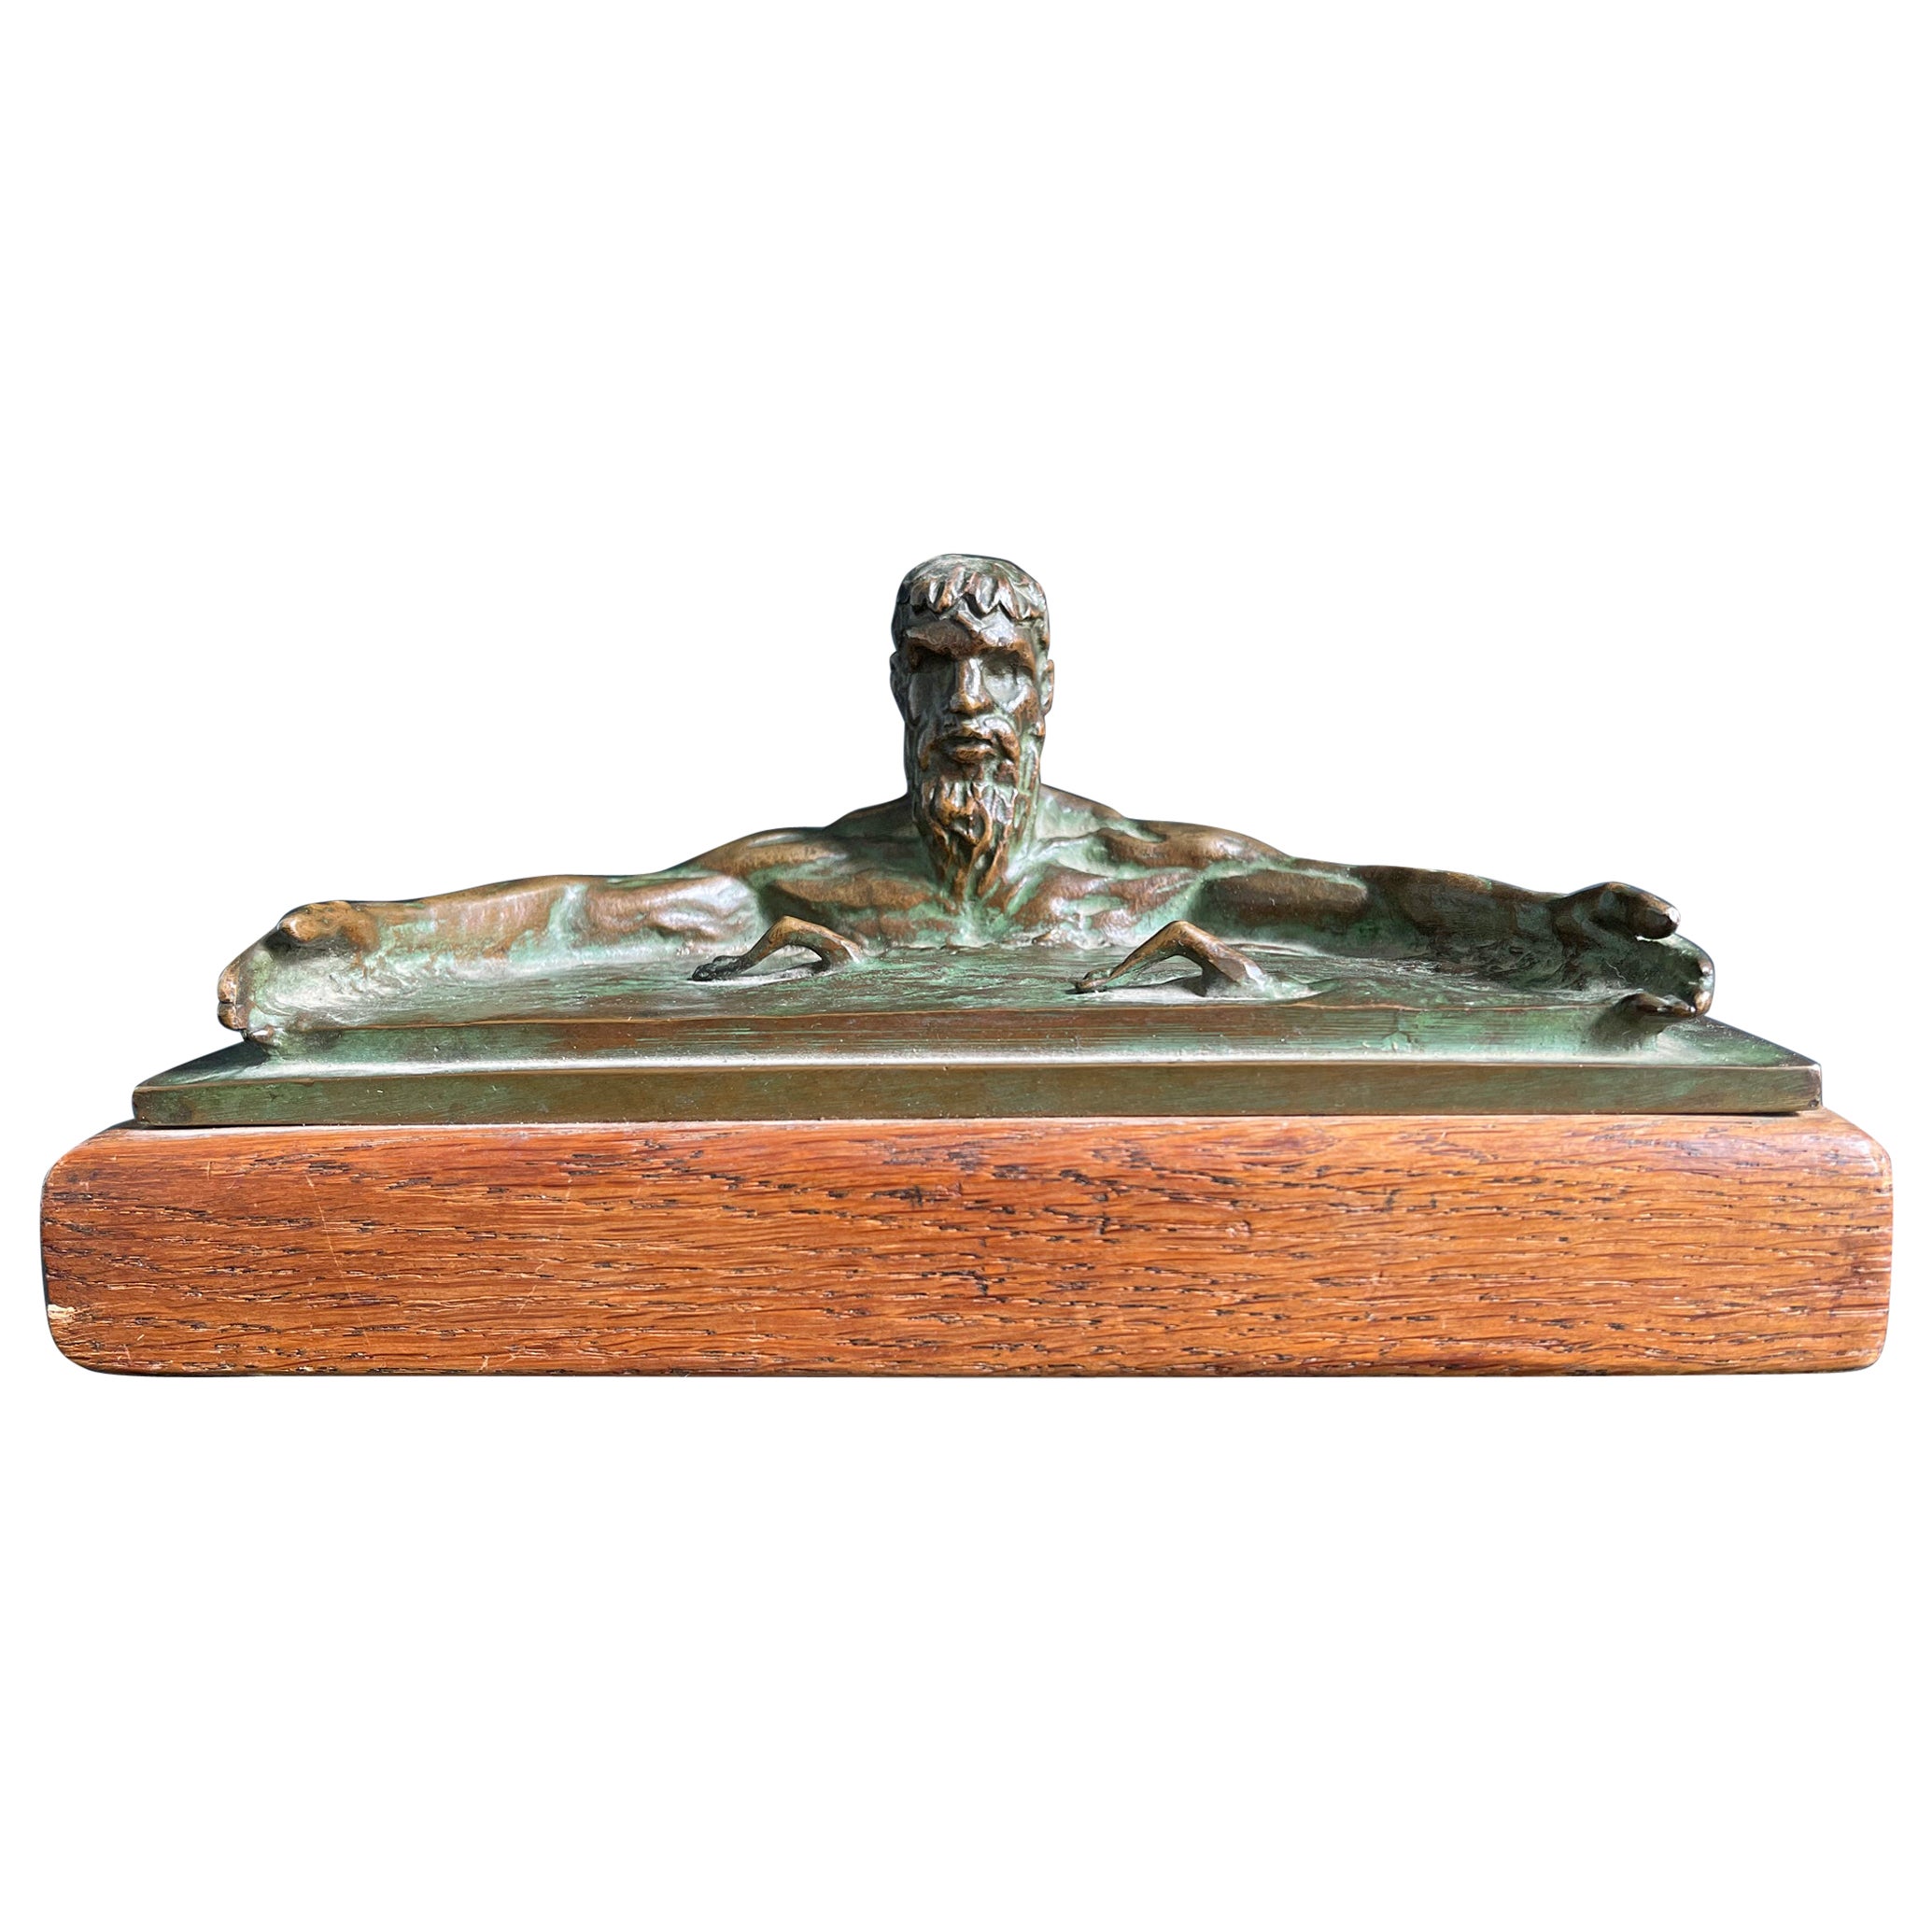 "Poseidon Calming the Sea, " Sculpture w/ Swimmers by Joe Brown Awarded by AAU